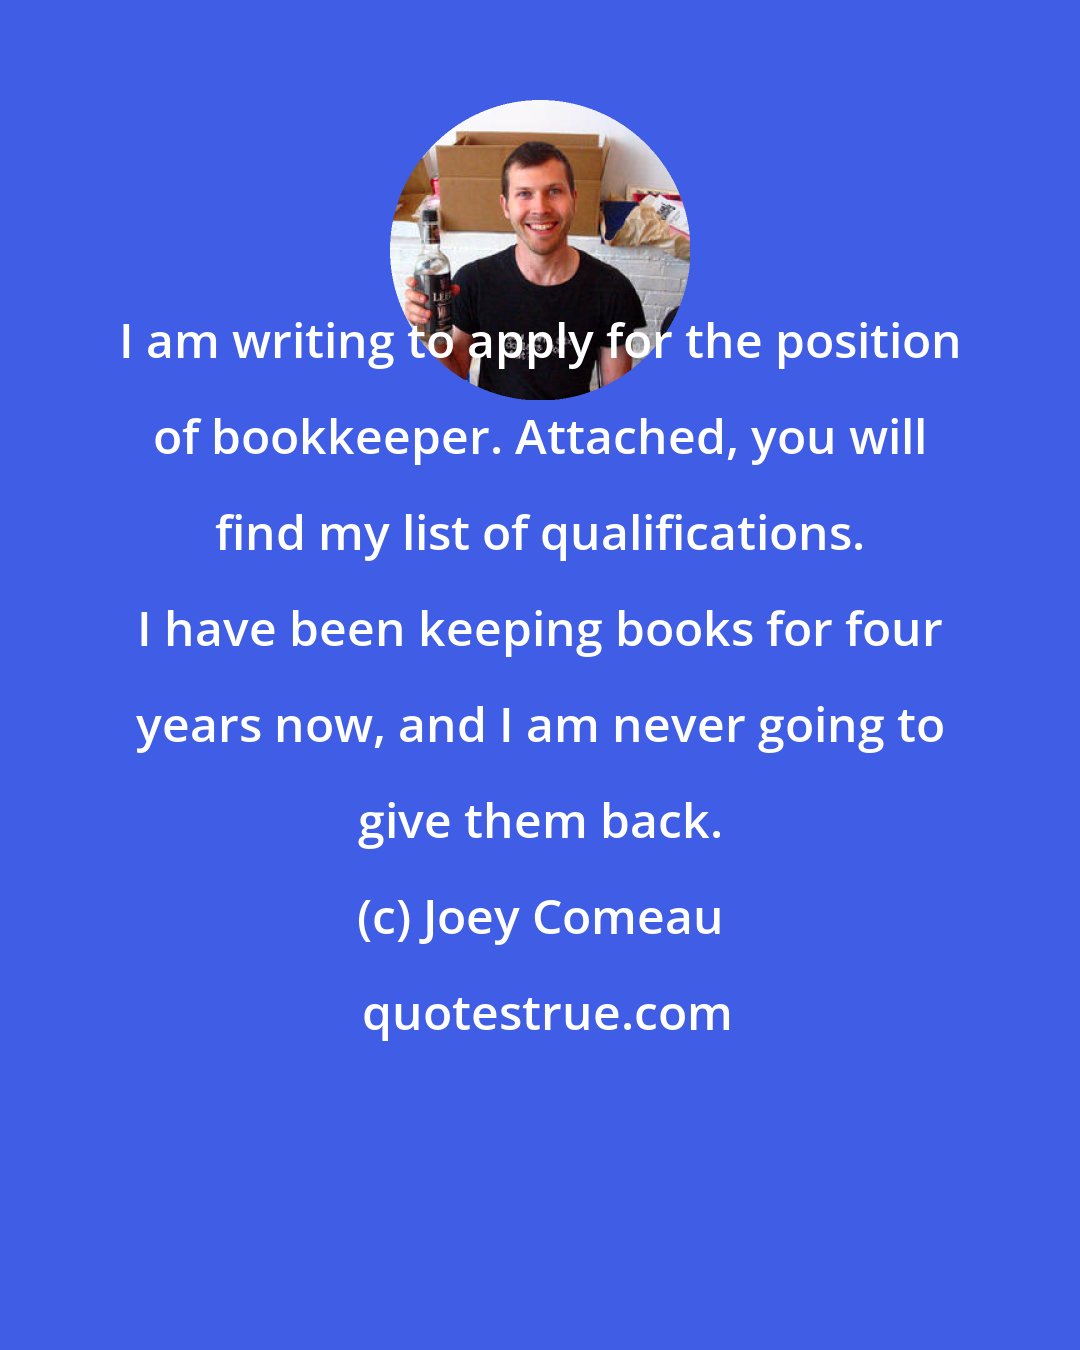 Joey Comeau: I am writing to apply for the position of bookkeeper. Attached, you will find my list of qualifications. I have been keeping books for four years now, and I am never going to give them back.